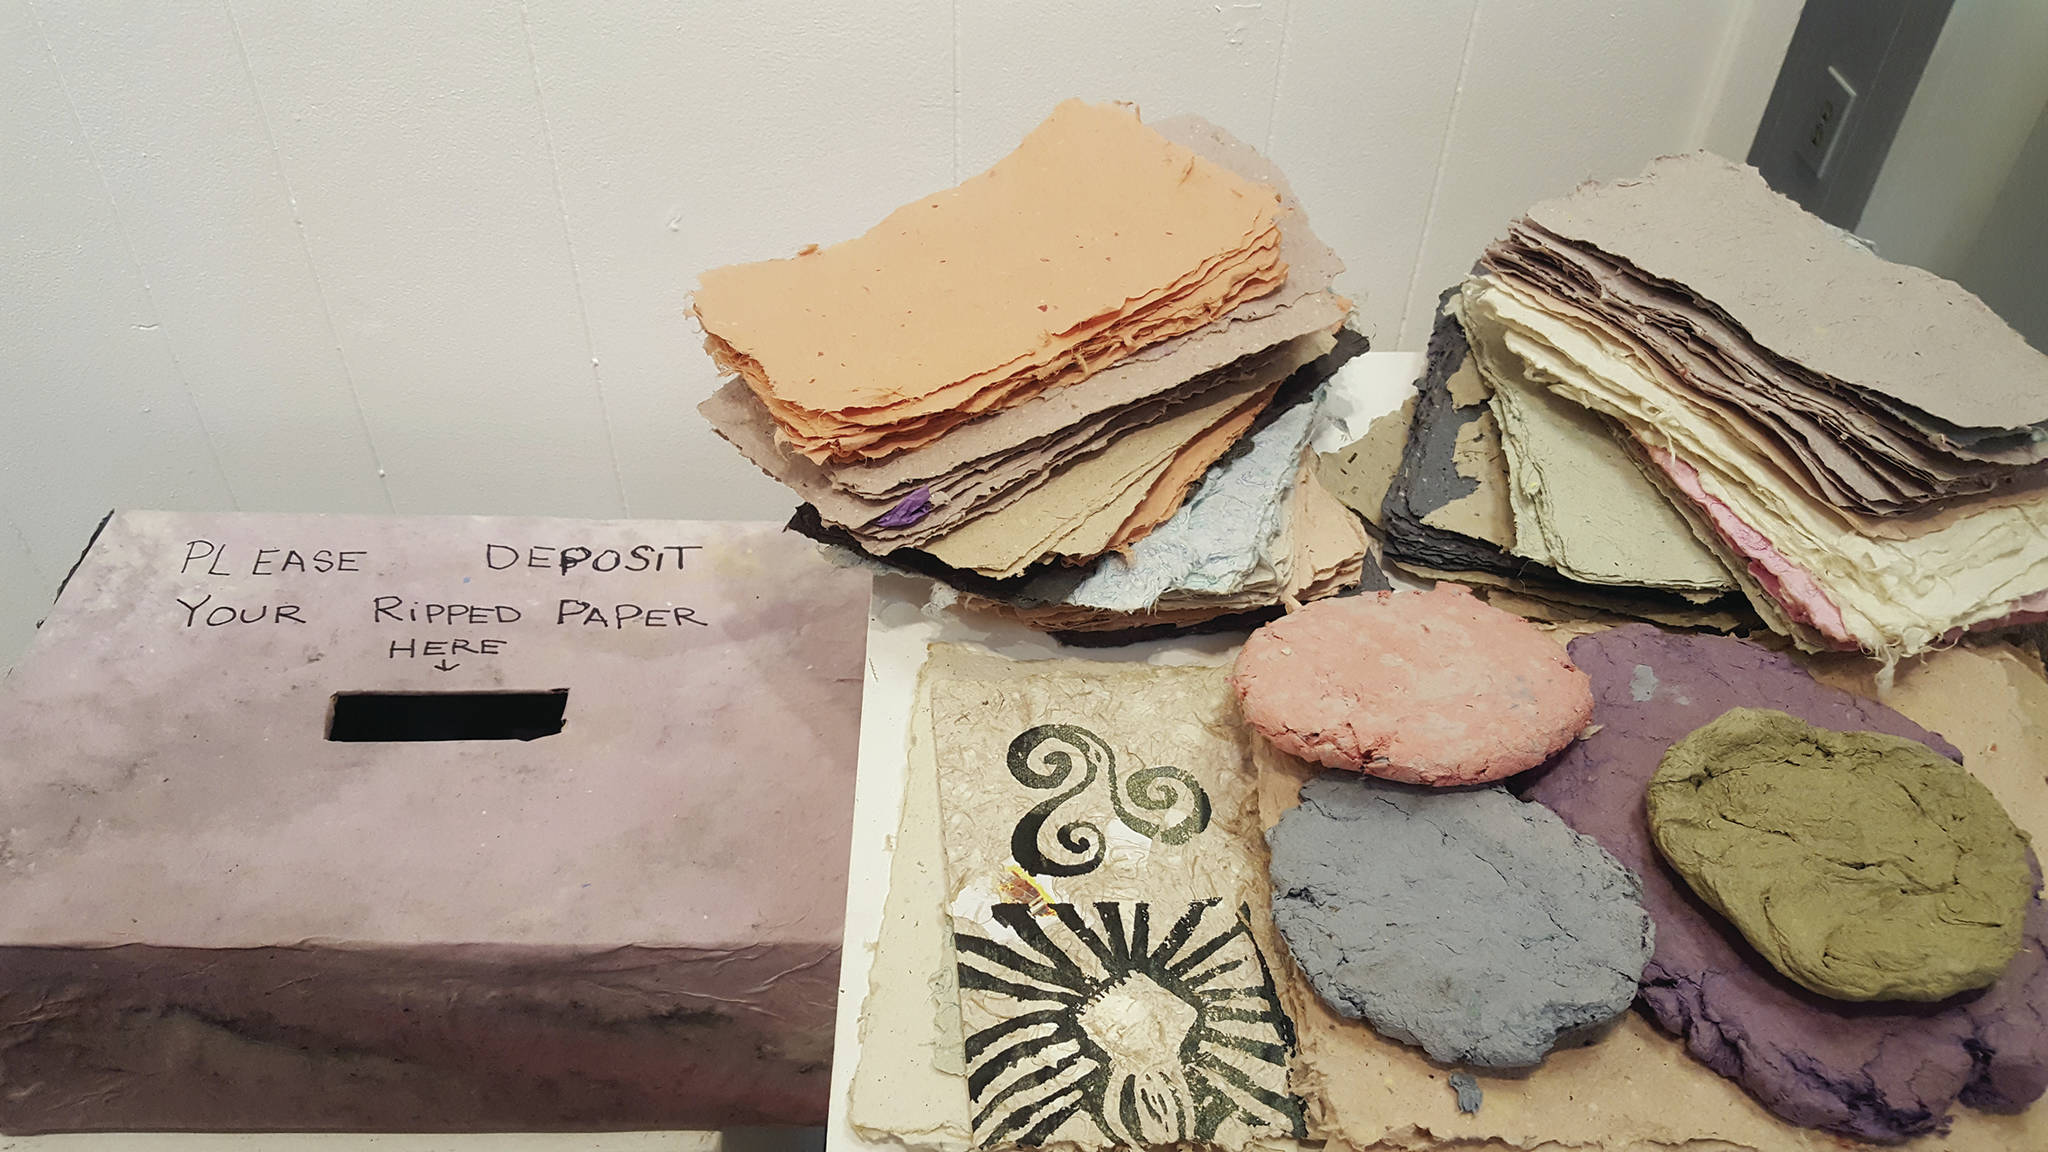 Artists Desiree Hagen and Kayla Bloom invited visitors to write on pieces of paper at the Homer Council on the Arts in Homer, Alaska and then deposit them in a box to be used in an art installation on Friday, Sept. 4, 2020. (Photo courtesy Homer Council on the Arts)